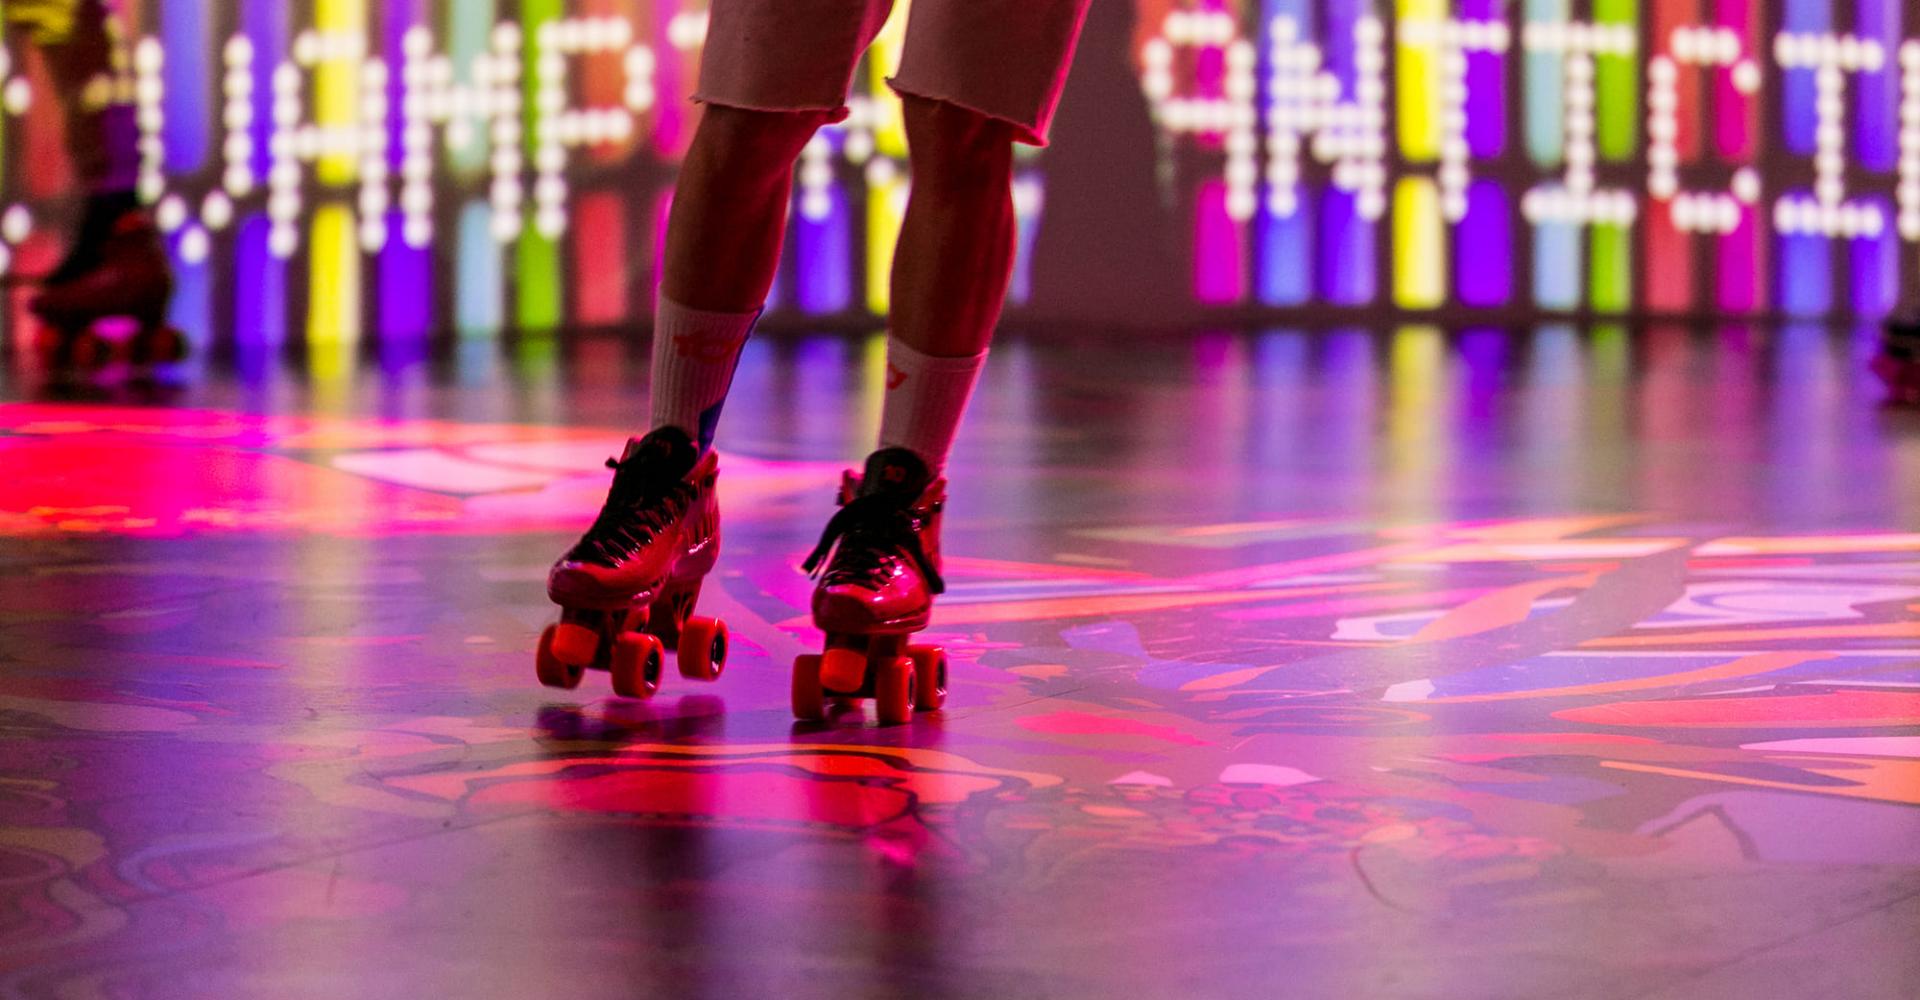 Someone rollerskating on a colourful floor